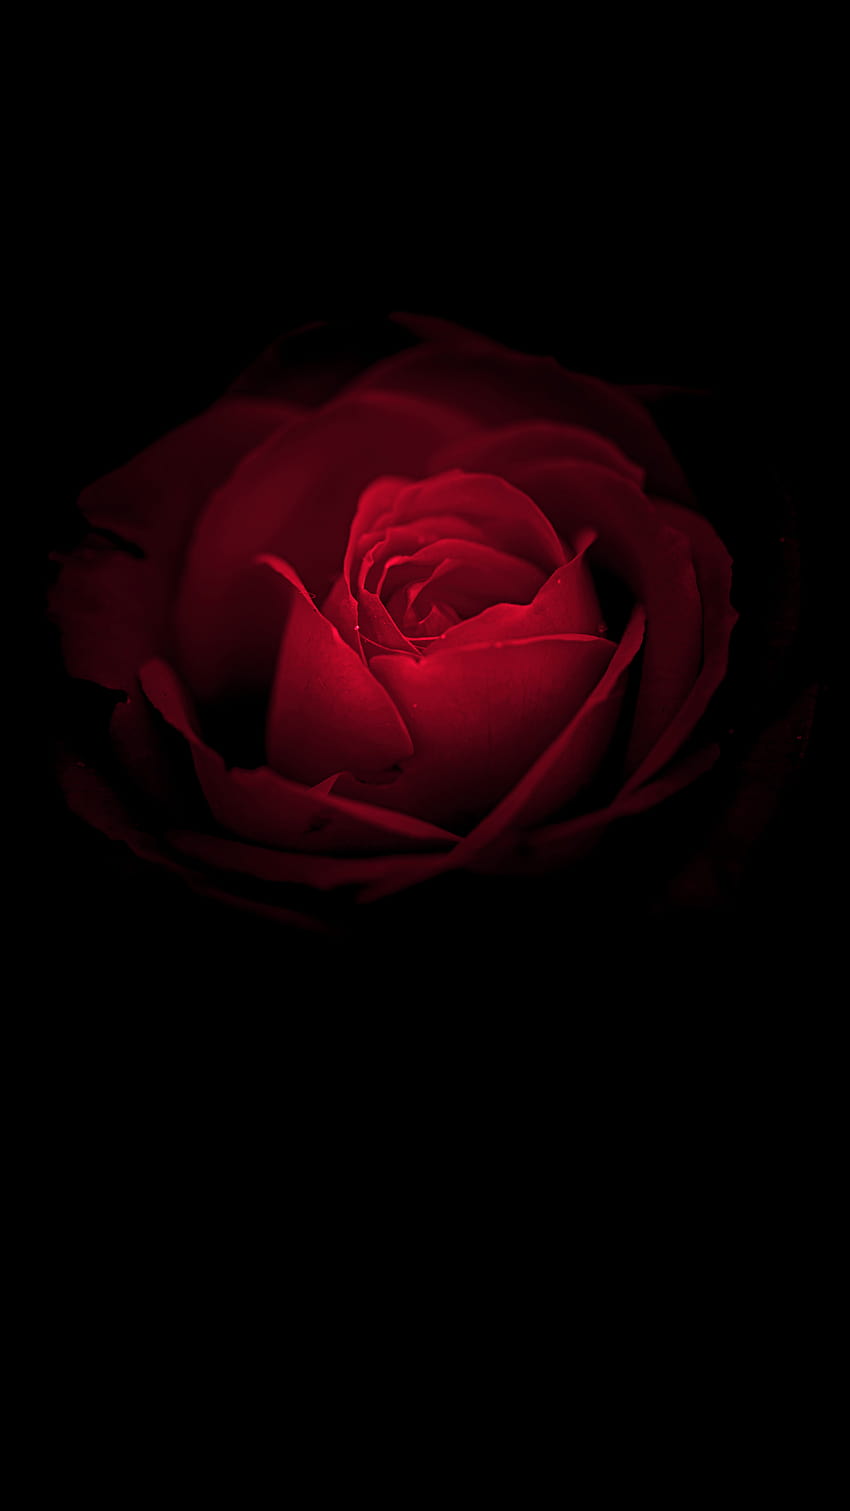 Rose flower, Red Rose, Huawei Mate RS, Porsche, mobile red rose flowers HD phone wallpaper